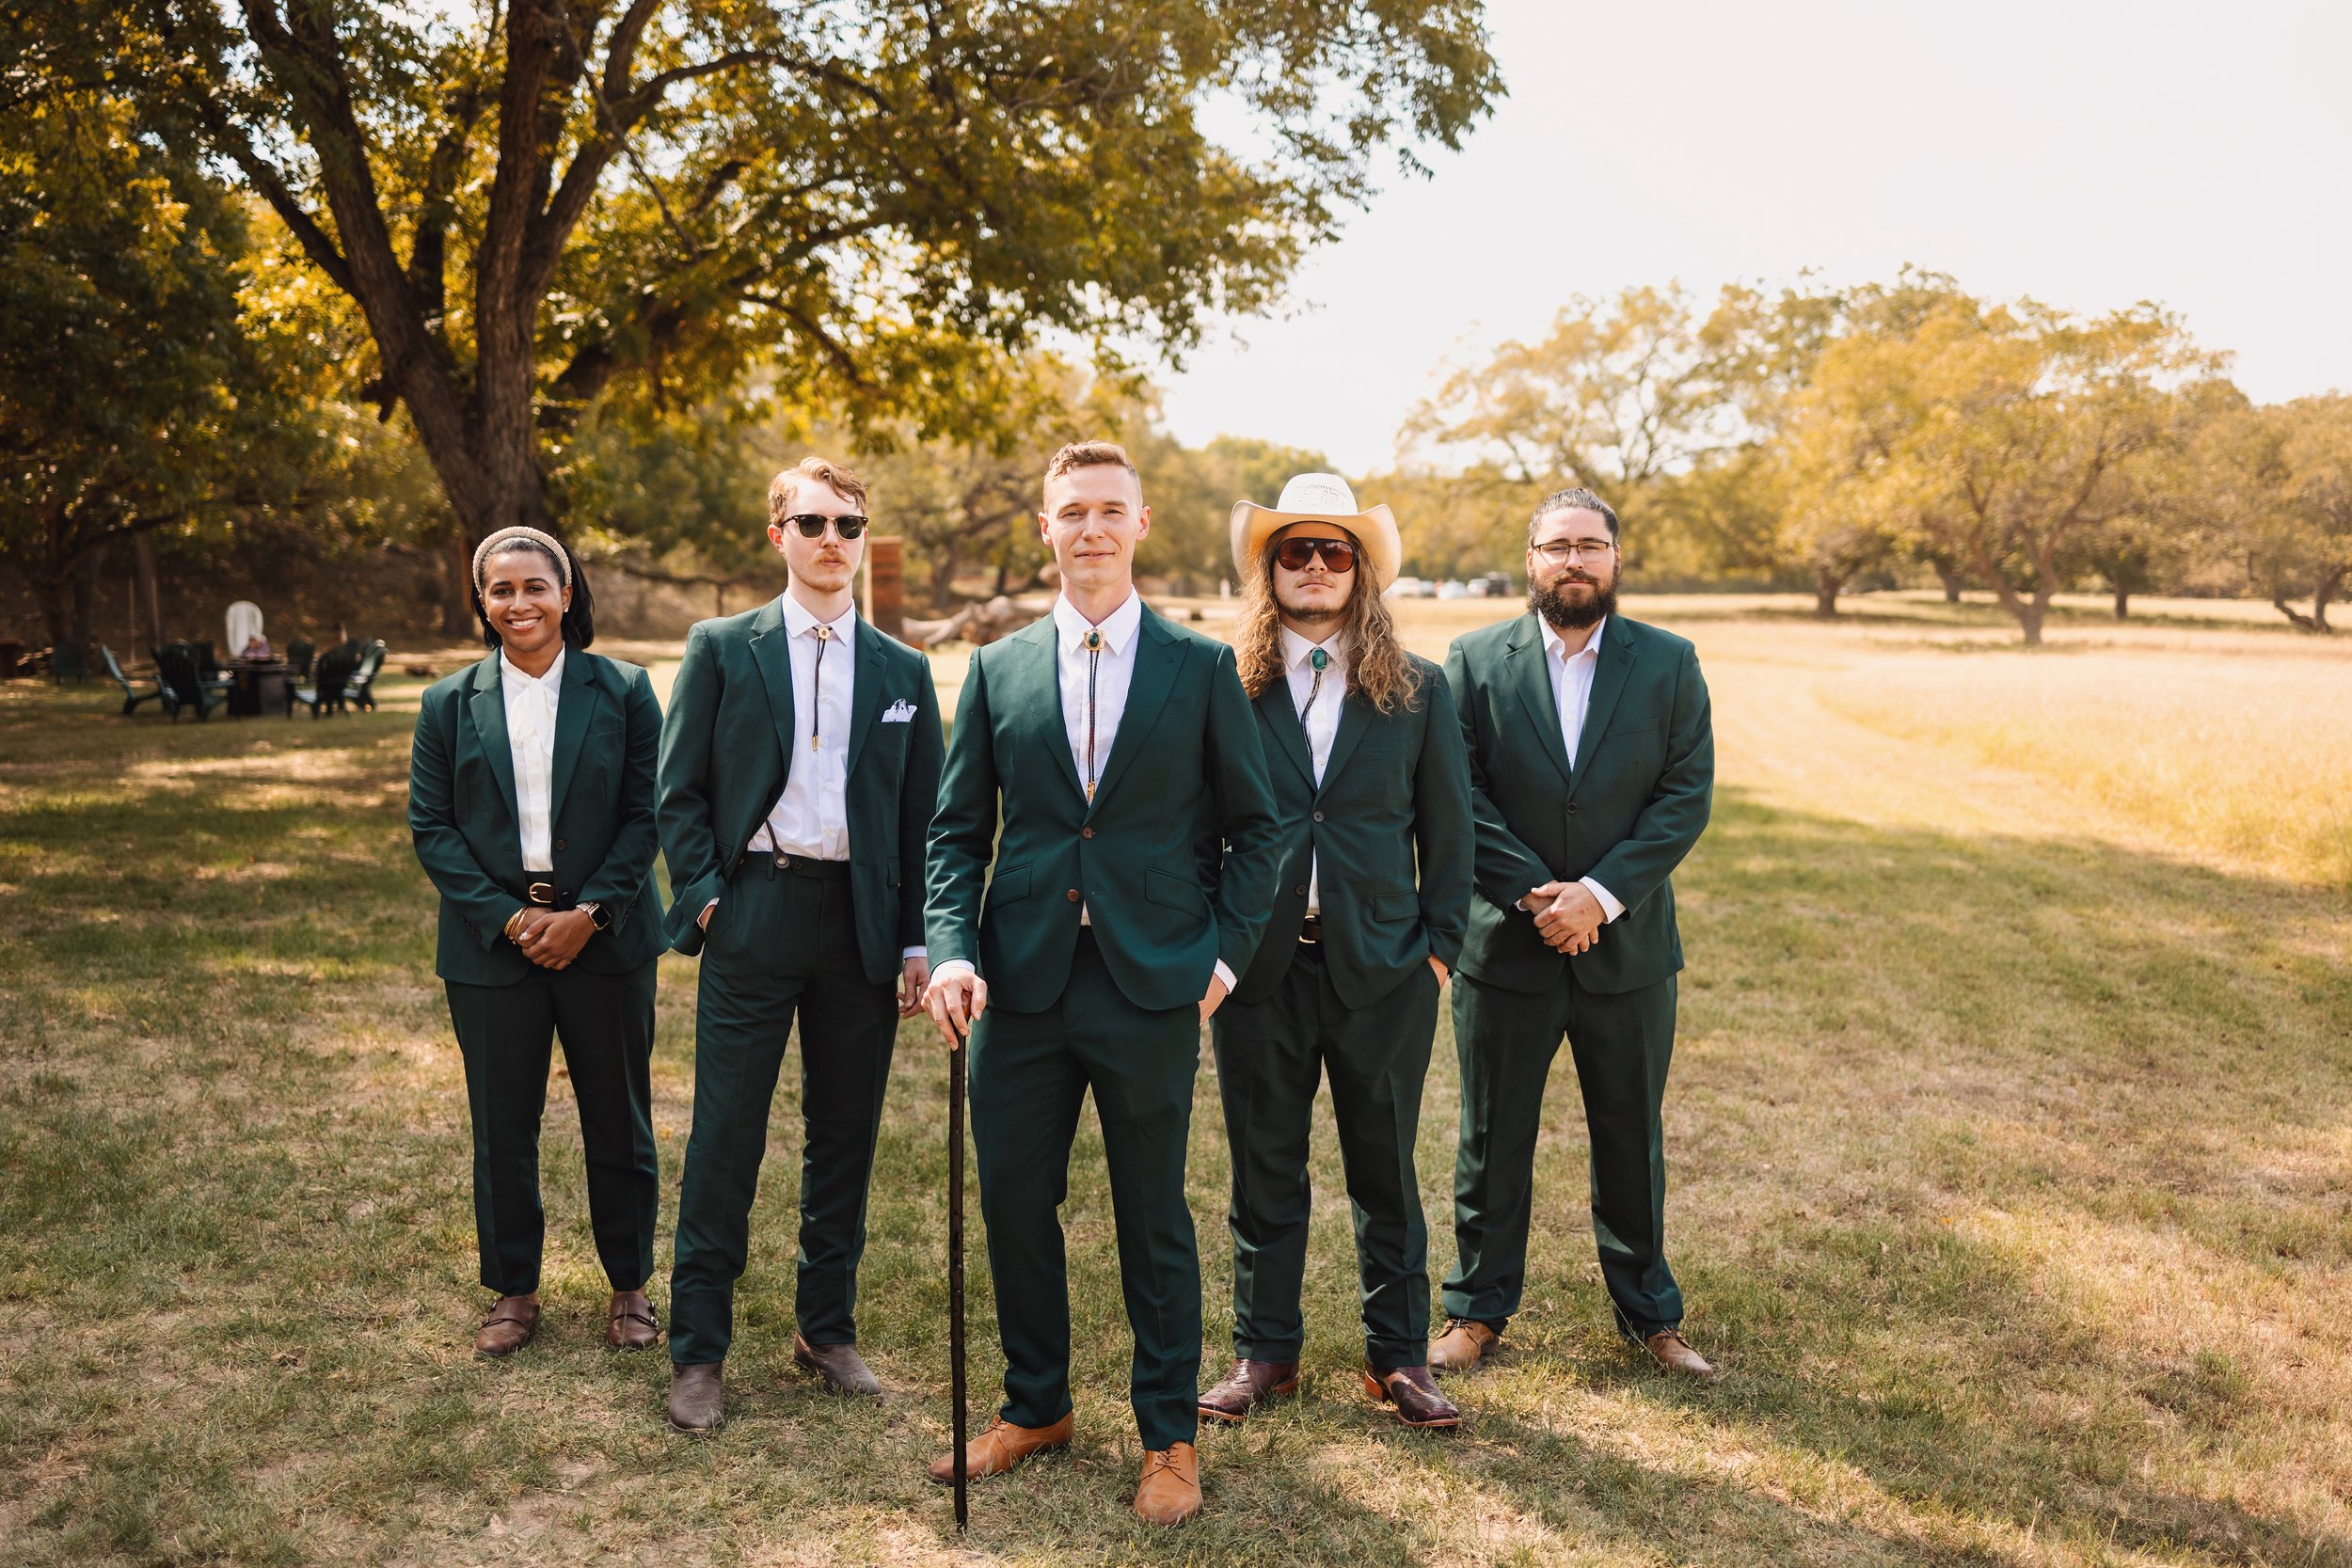 Groomsmen and woman standing side by side, wearing matching non-traditional suits in shades of forest green, with bolo ties and walking stick as accessories.